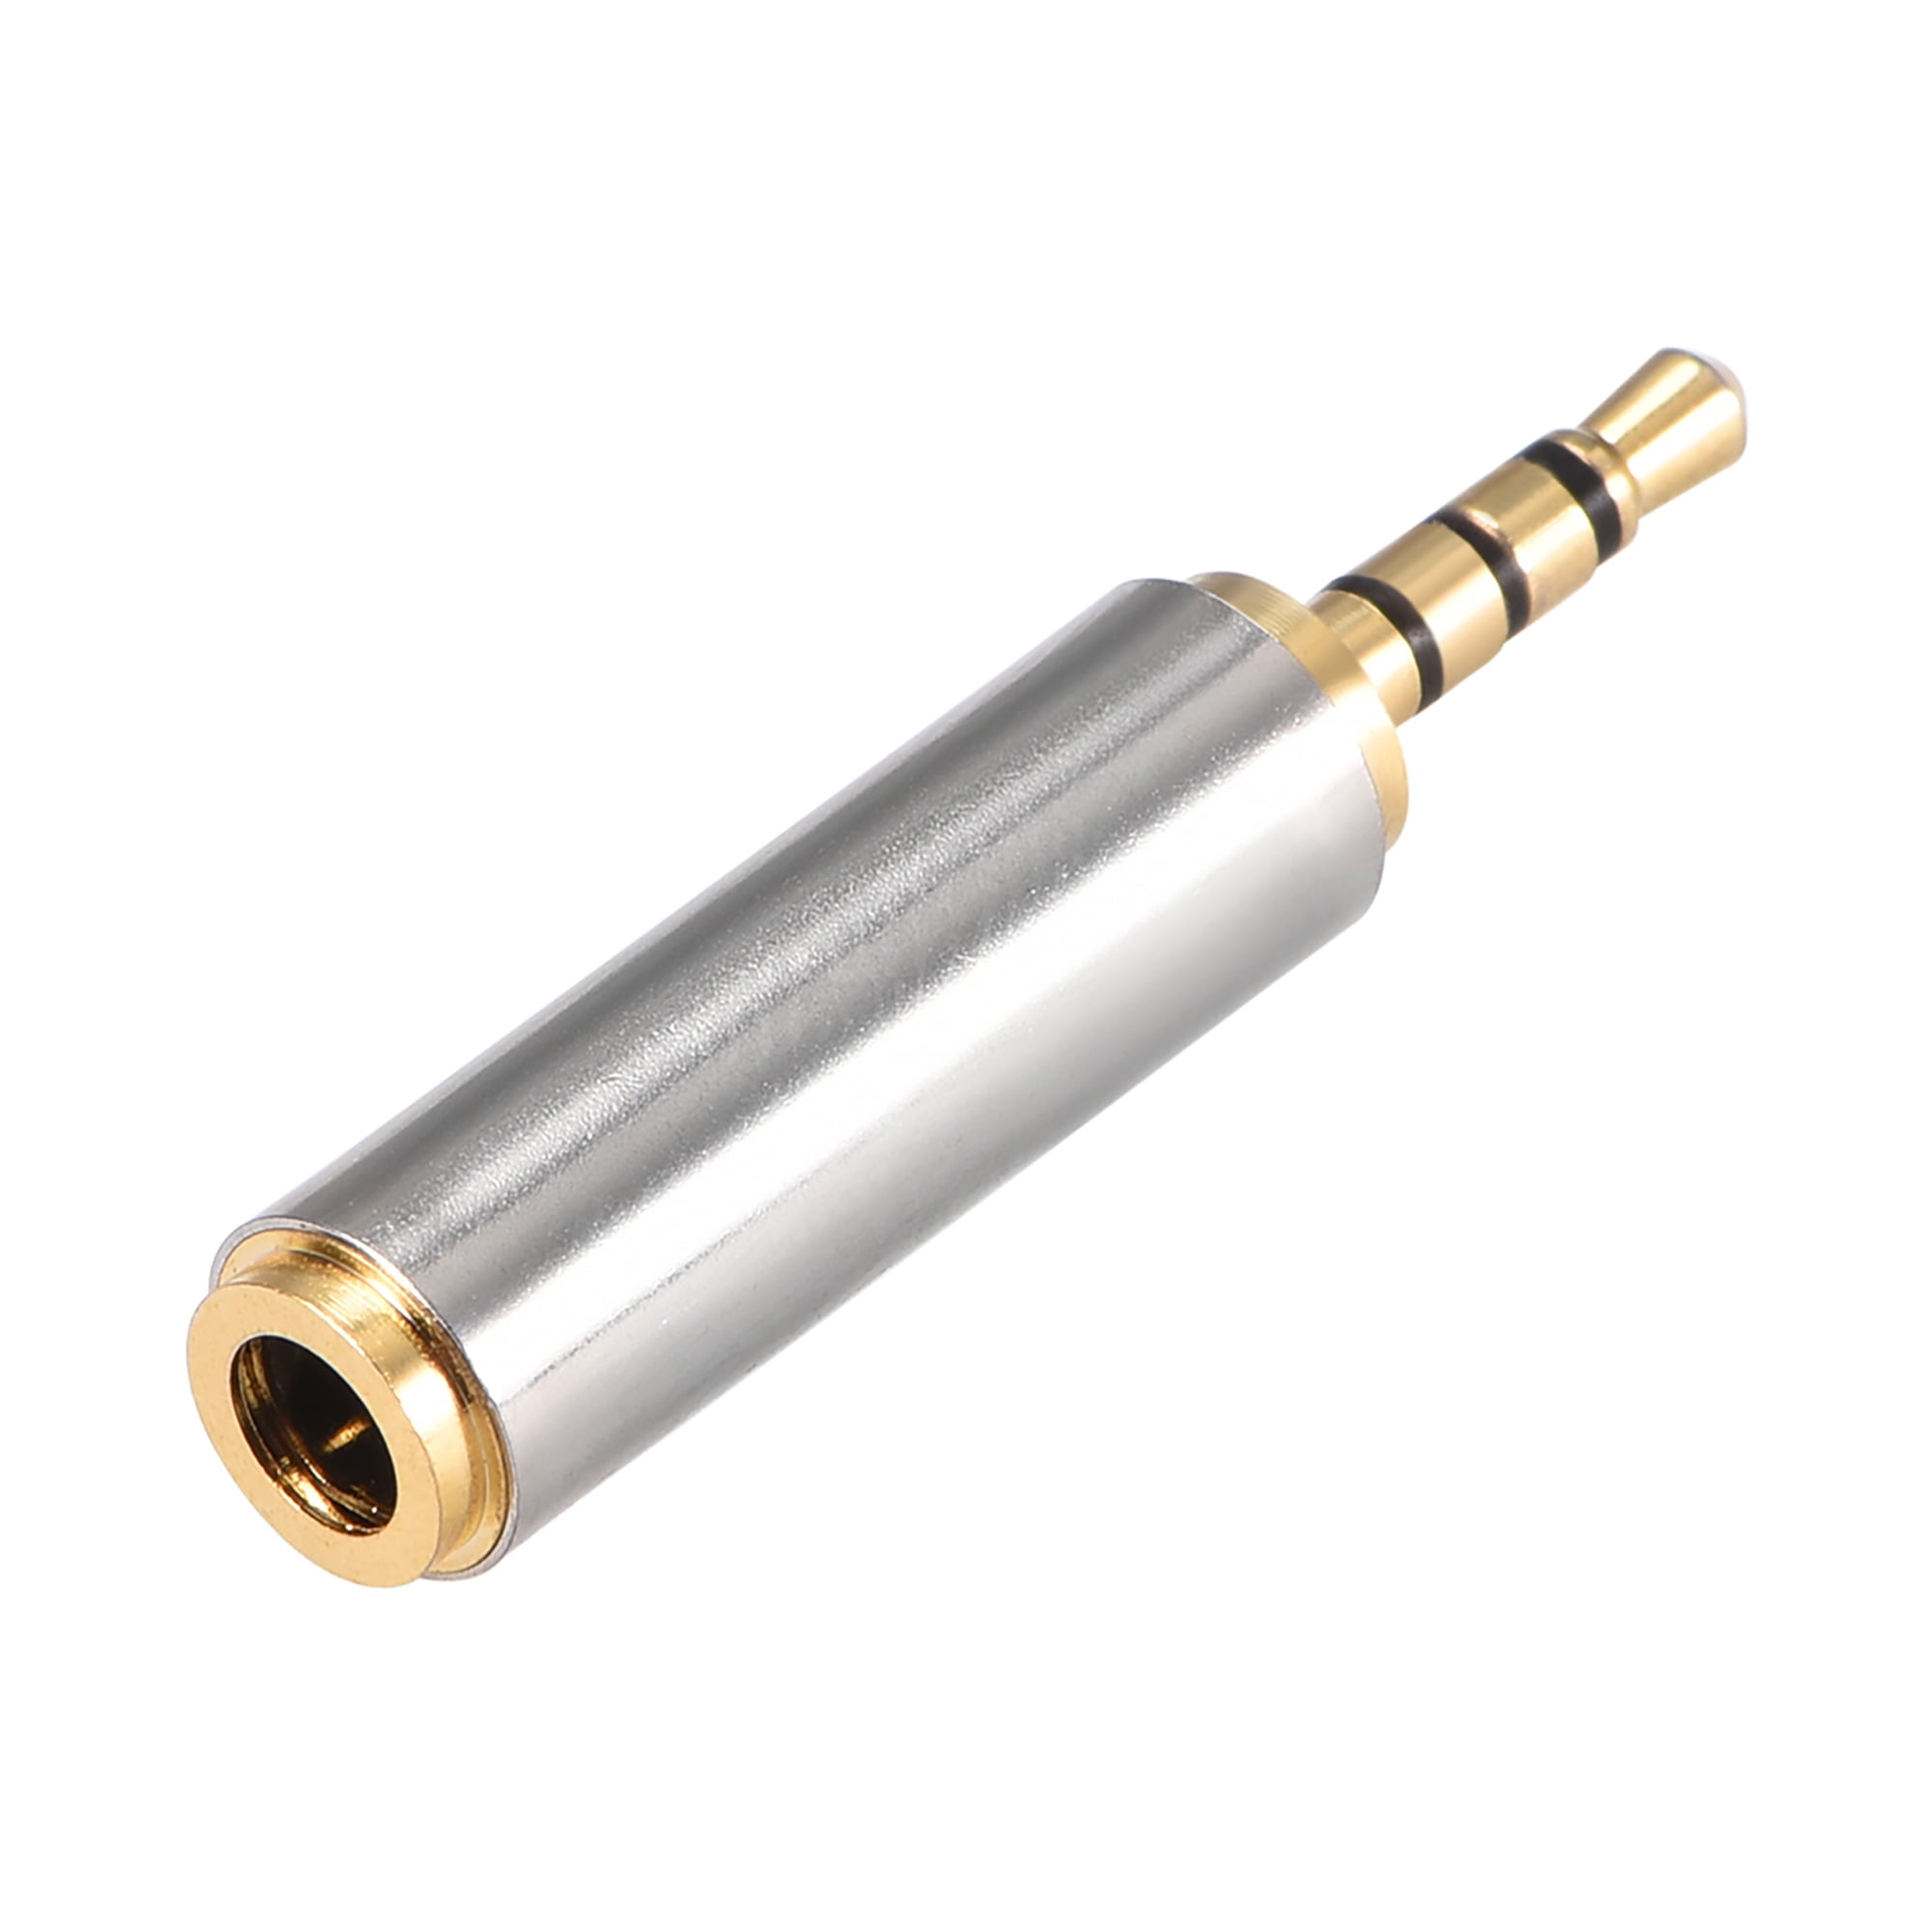 3.5mm Stereo 4 Pole Male to 2.5mm Female Adapter Coupler Converter Zinc Alloy